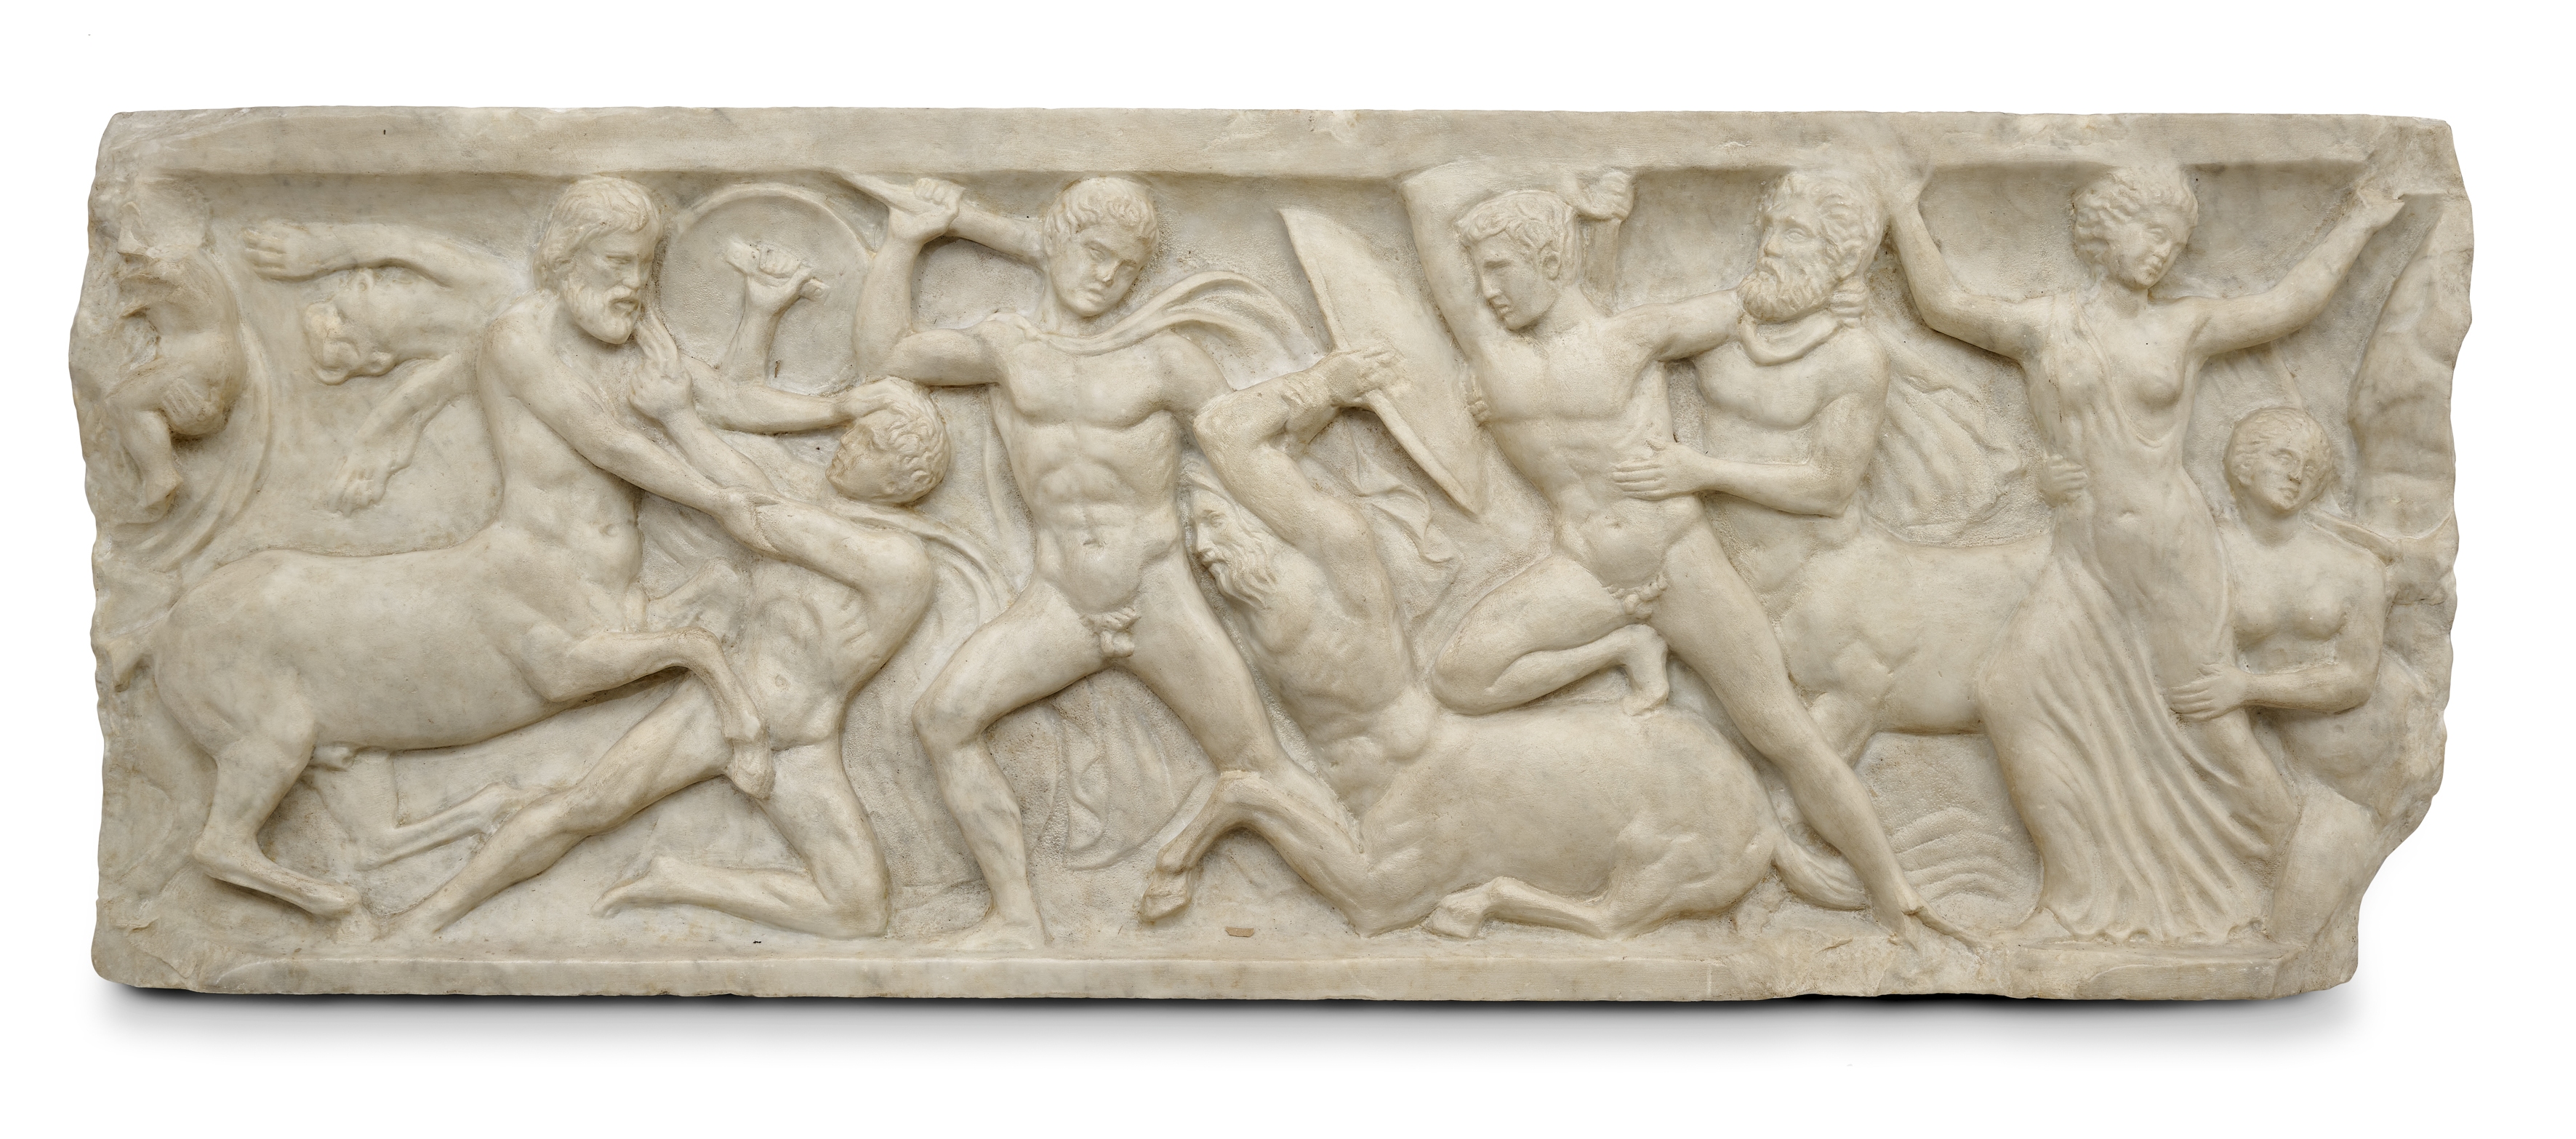 An Italian carved white marble figural frieze depicting the Battle of the Centaurs and Lapiths Af...